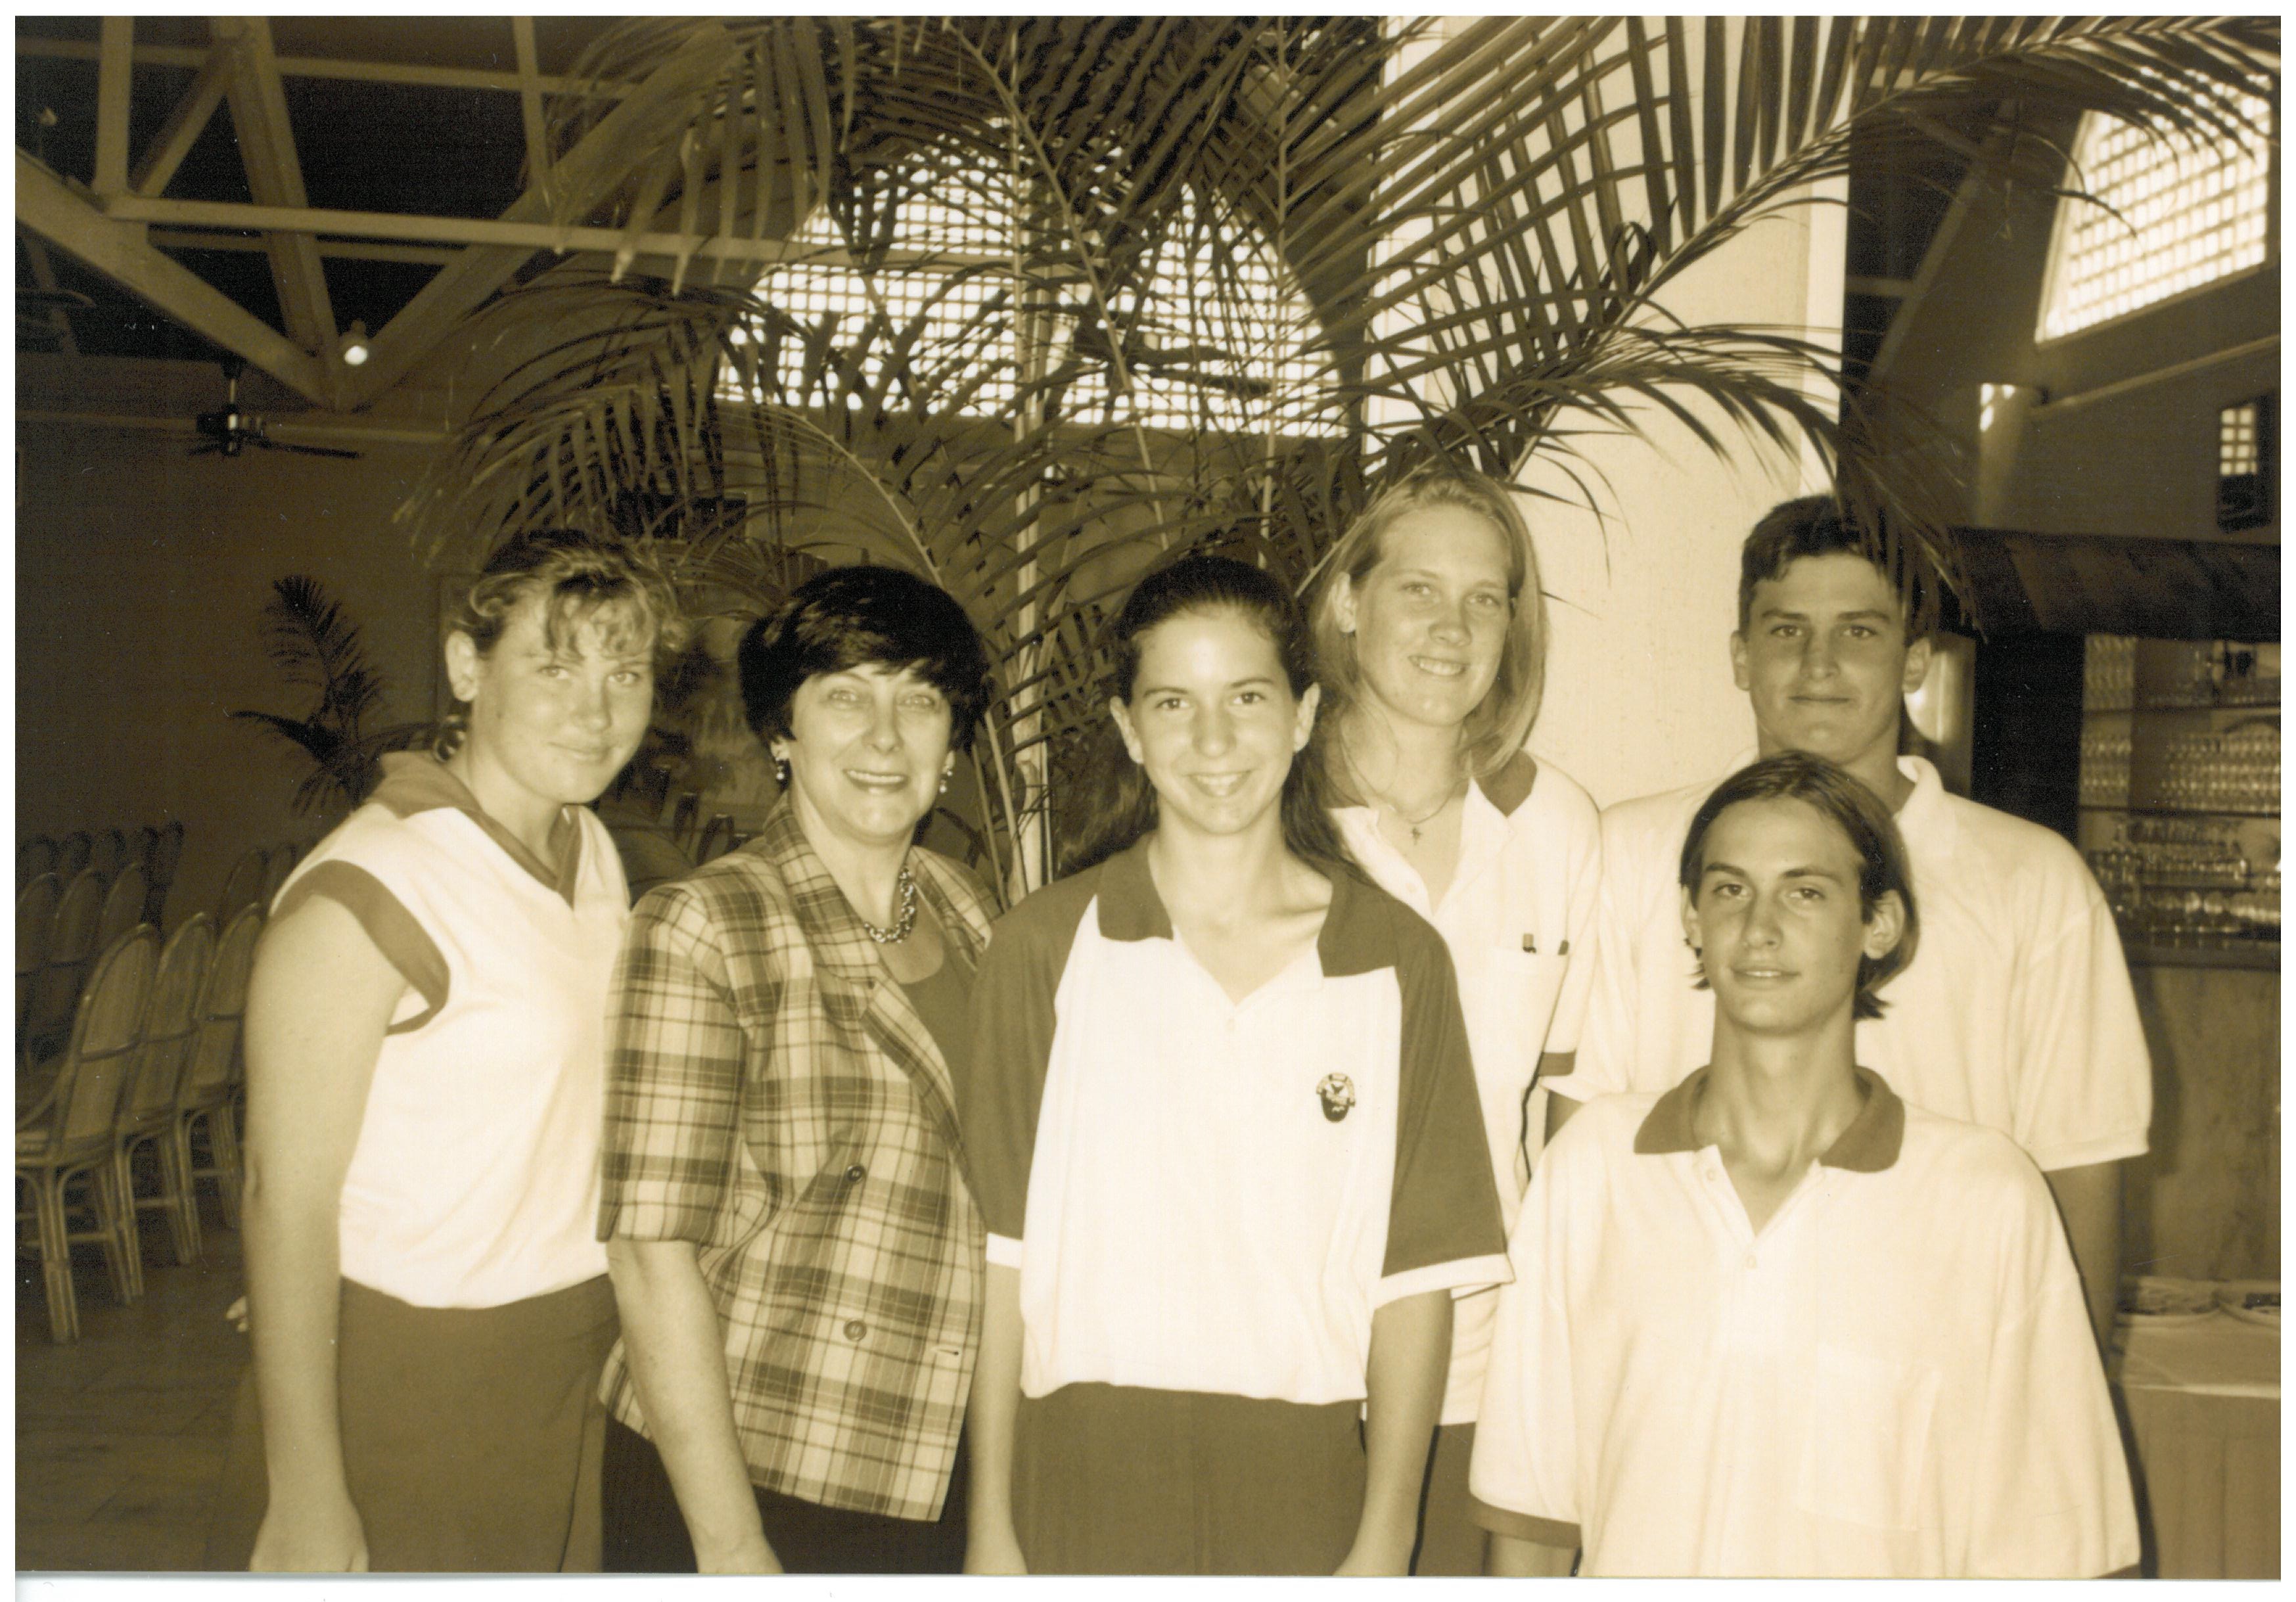 Committee member Senator Kay Patterson (second from left) with students from Woree High School and Cairns High School, 22 February 1995.